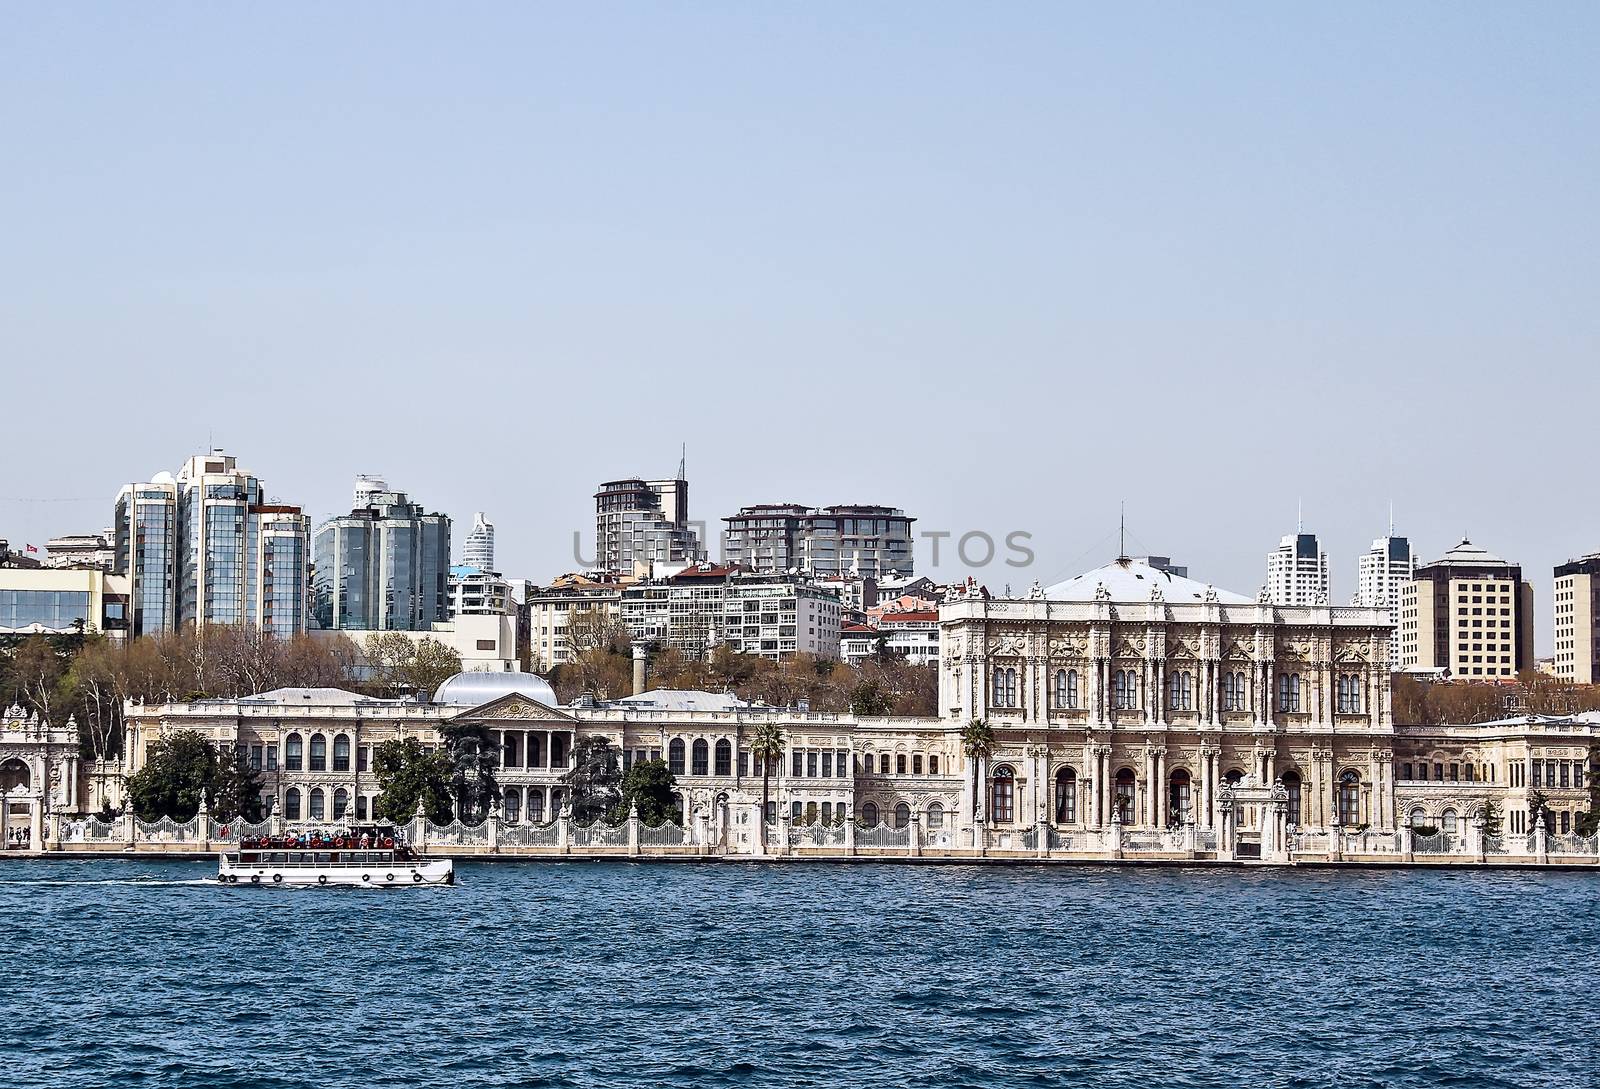 Dolmabahce Palace located on the European coastline of the Bosphorus strait, served as the main administrative center of the Ottoman Empire from 1856 to 1922